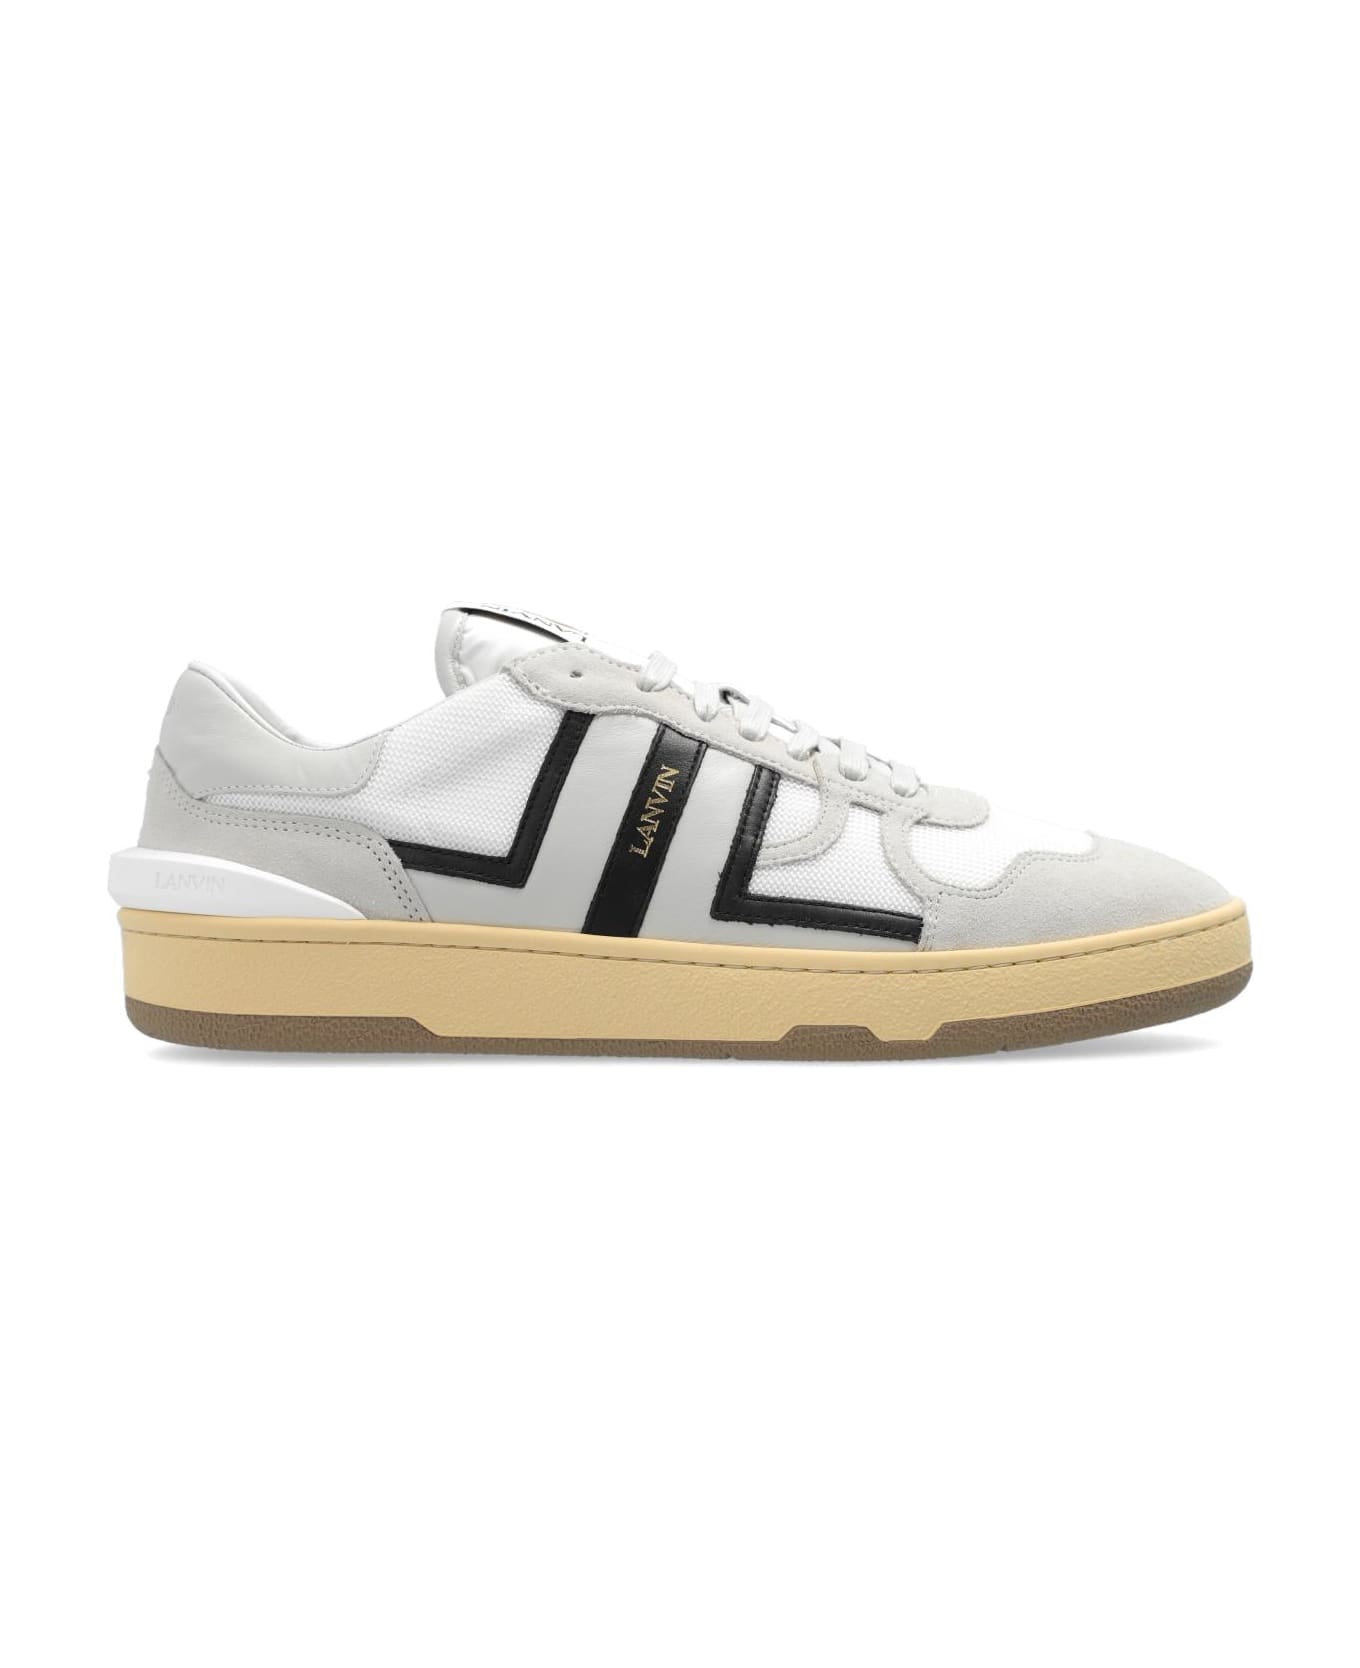 Lanvin 'clay Low' Sneakers - Black/off White